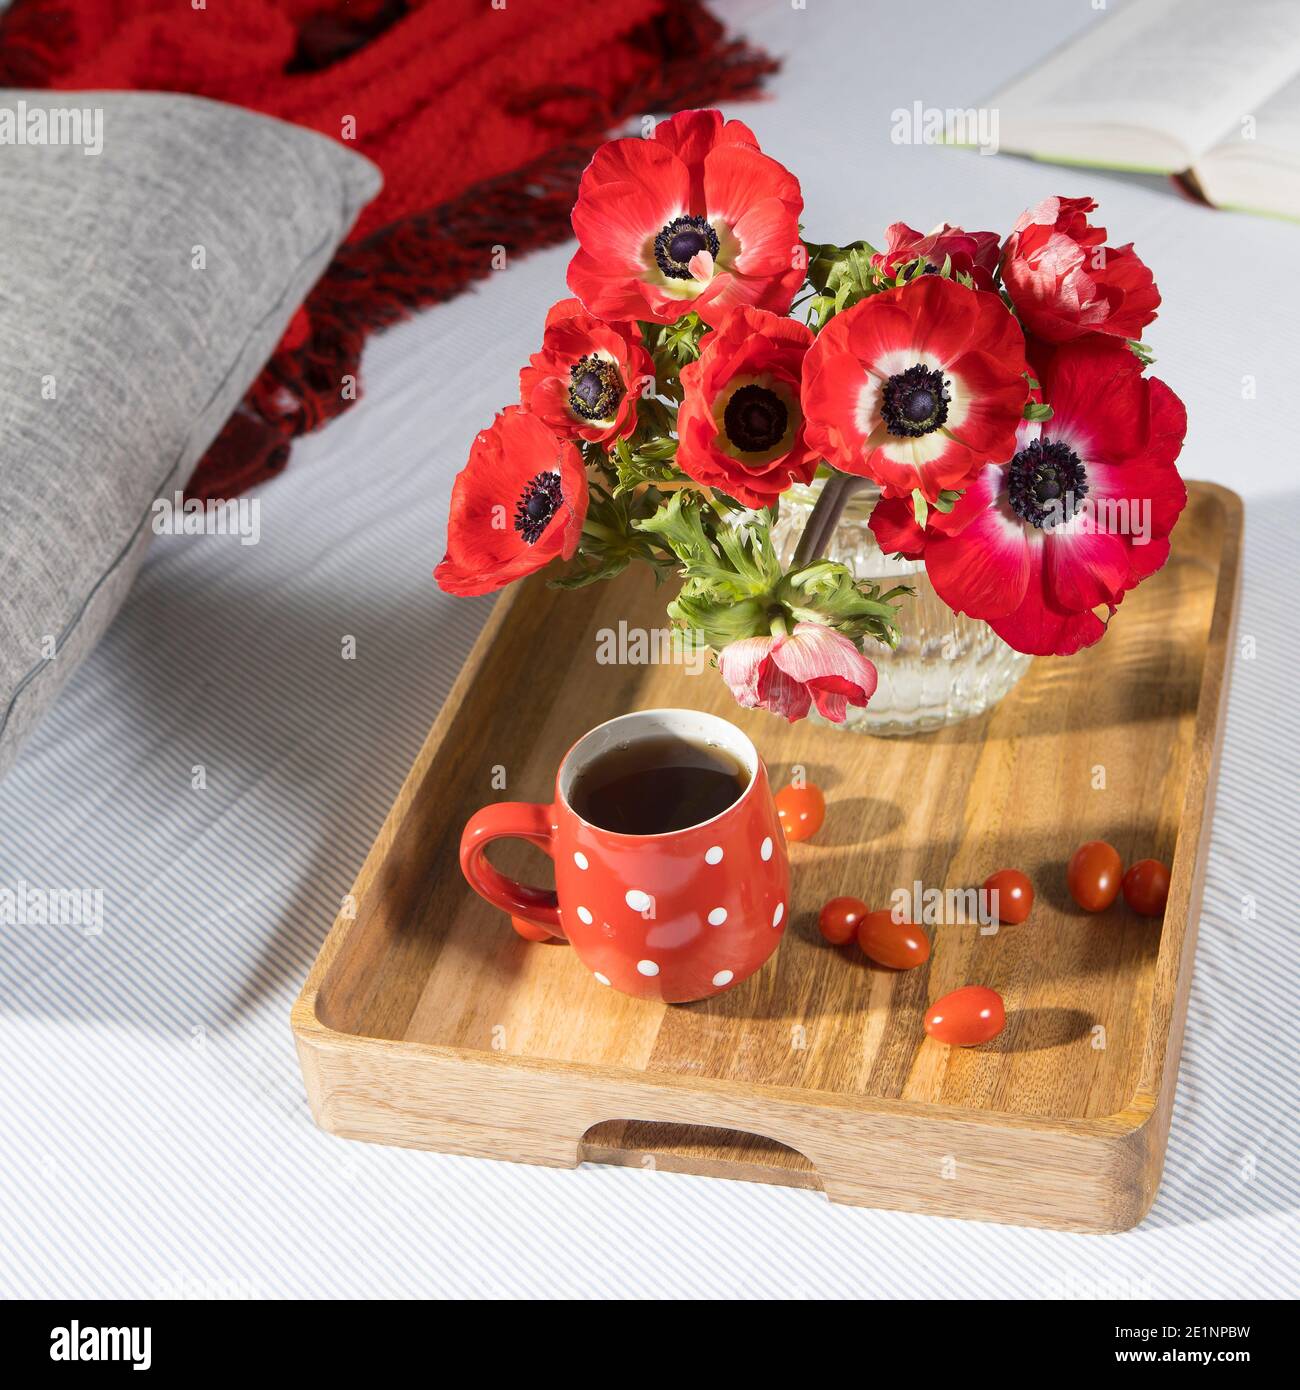 A bouquet of red anemones in a glass vase on a wooden tray on the bed. White polka dot cup with tea. Woolen plaid on a gray sheet. Morning Stock Photo